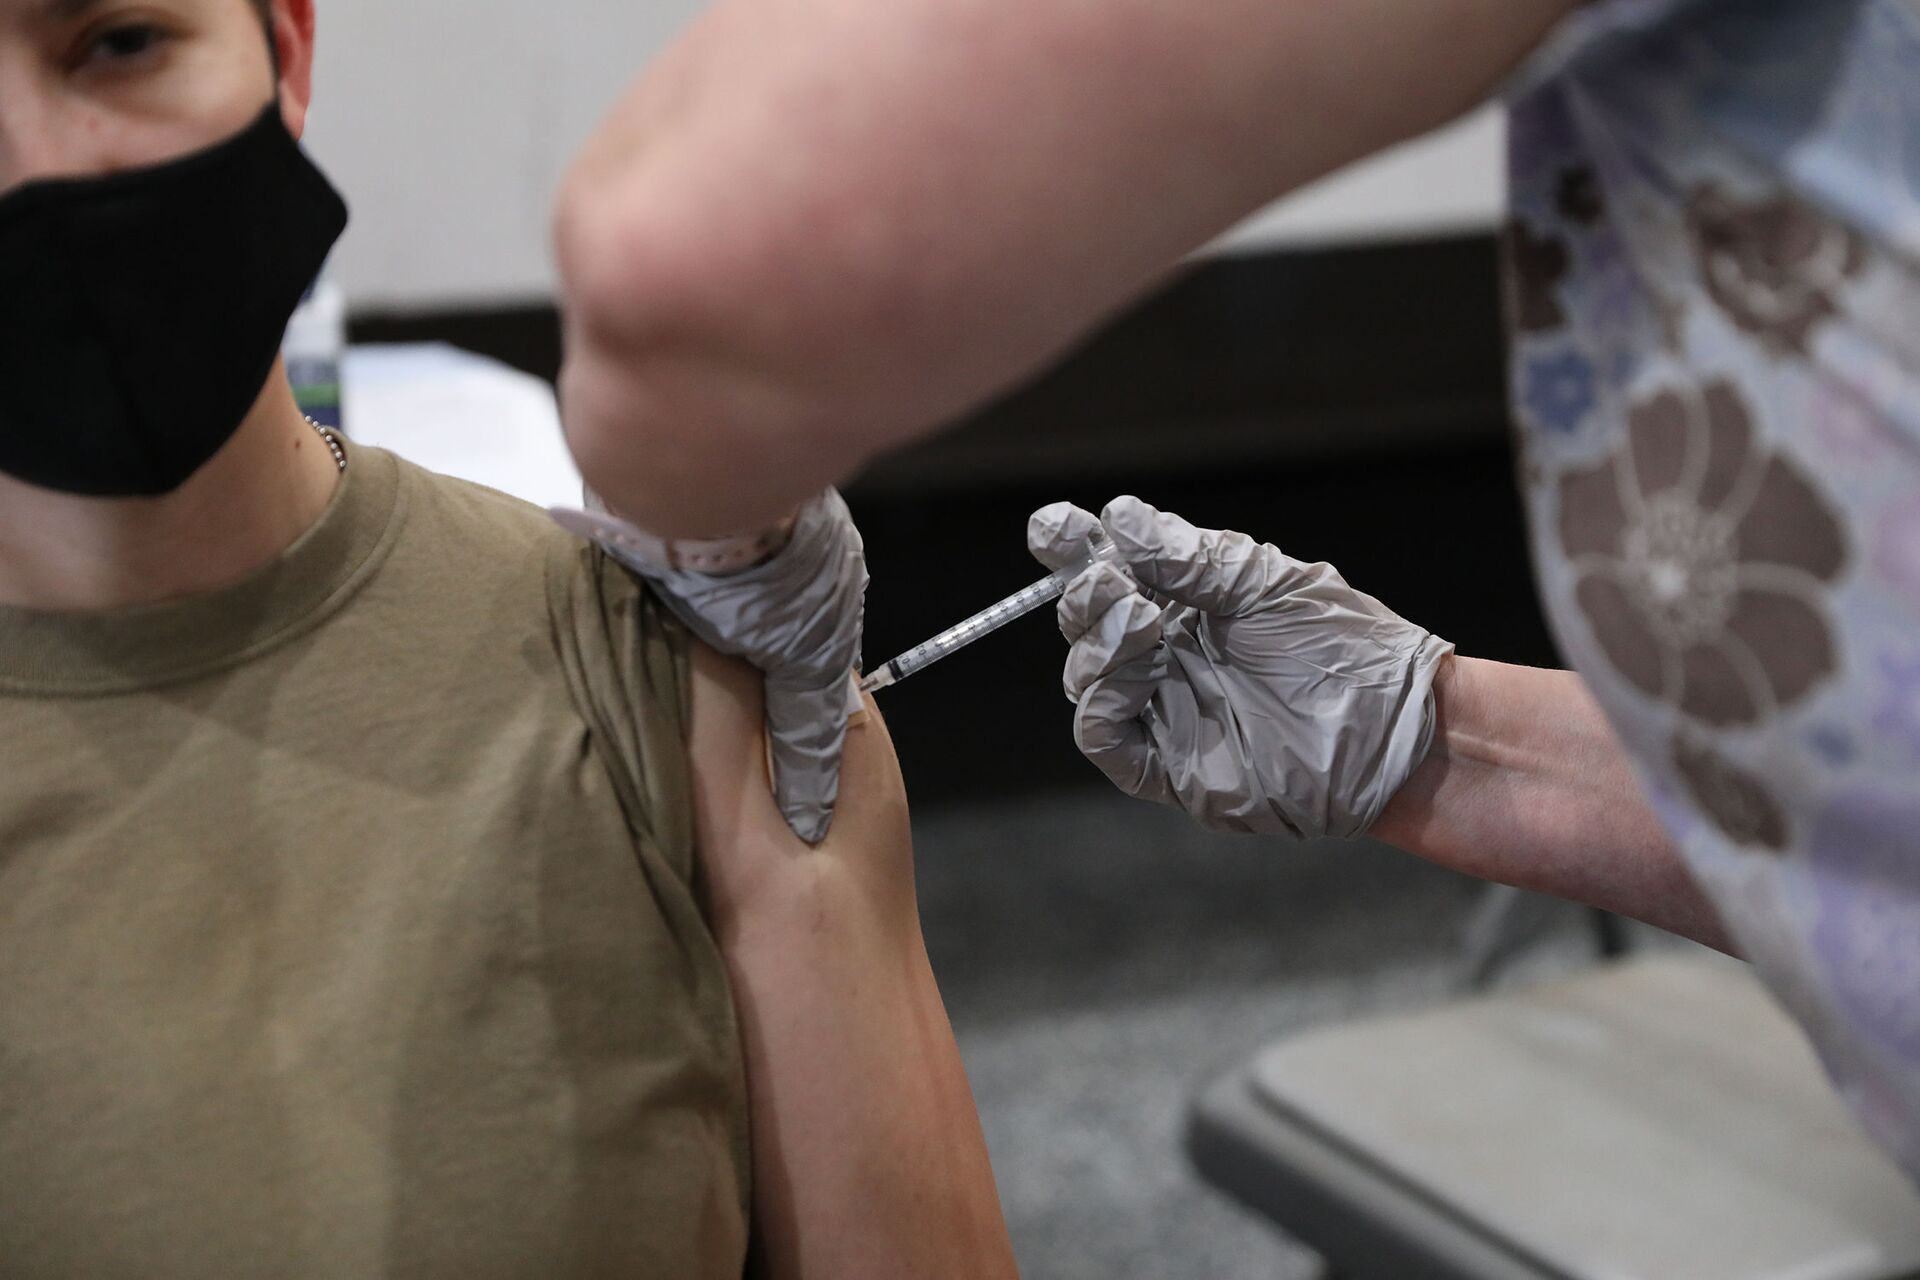 U.S. Army Sgt. Brandy Herrmann, assigned to the 24th Theater Public Affairs Support Element, receives the COVID-19 vaccination at Stayton Theater, at Fort Bliss, Texas, Feb. 5, 2021. Herrmann was instructed to wait 15 minutes before driving or participate in vigorous physical activity after receiving the shot. (U.S. Army photo by Pfc. Maxwell Bass, 24th Theater Public Affairs Support Element) - Sputnik International, 1920, 07.09.2021